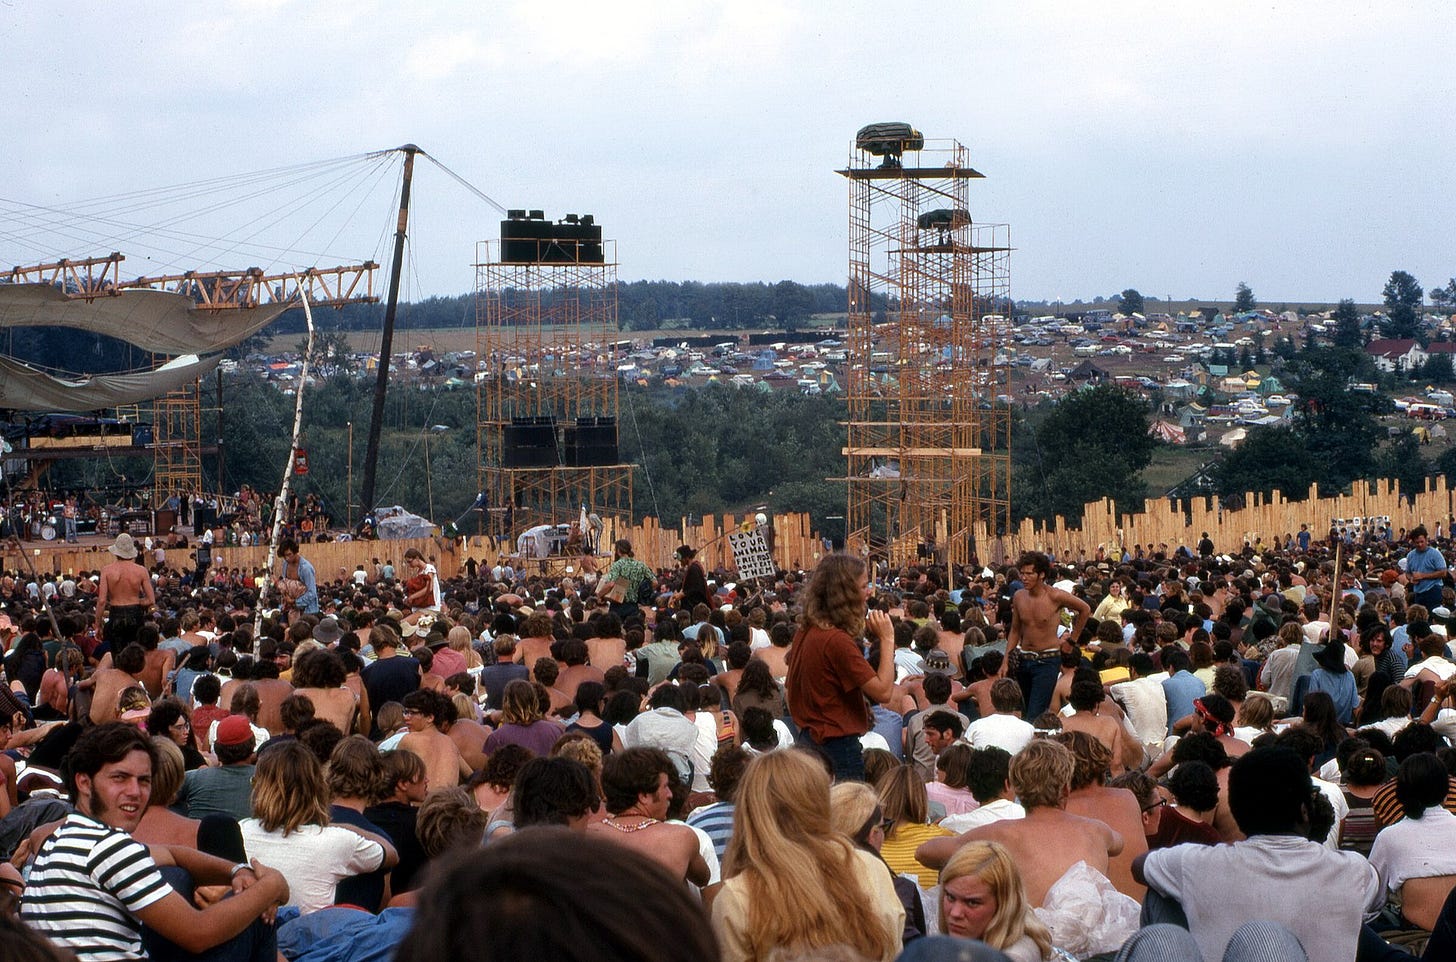 Image of Joe Cocker at Woodstock, the festival for the American counterculture